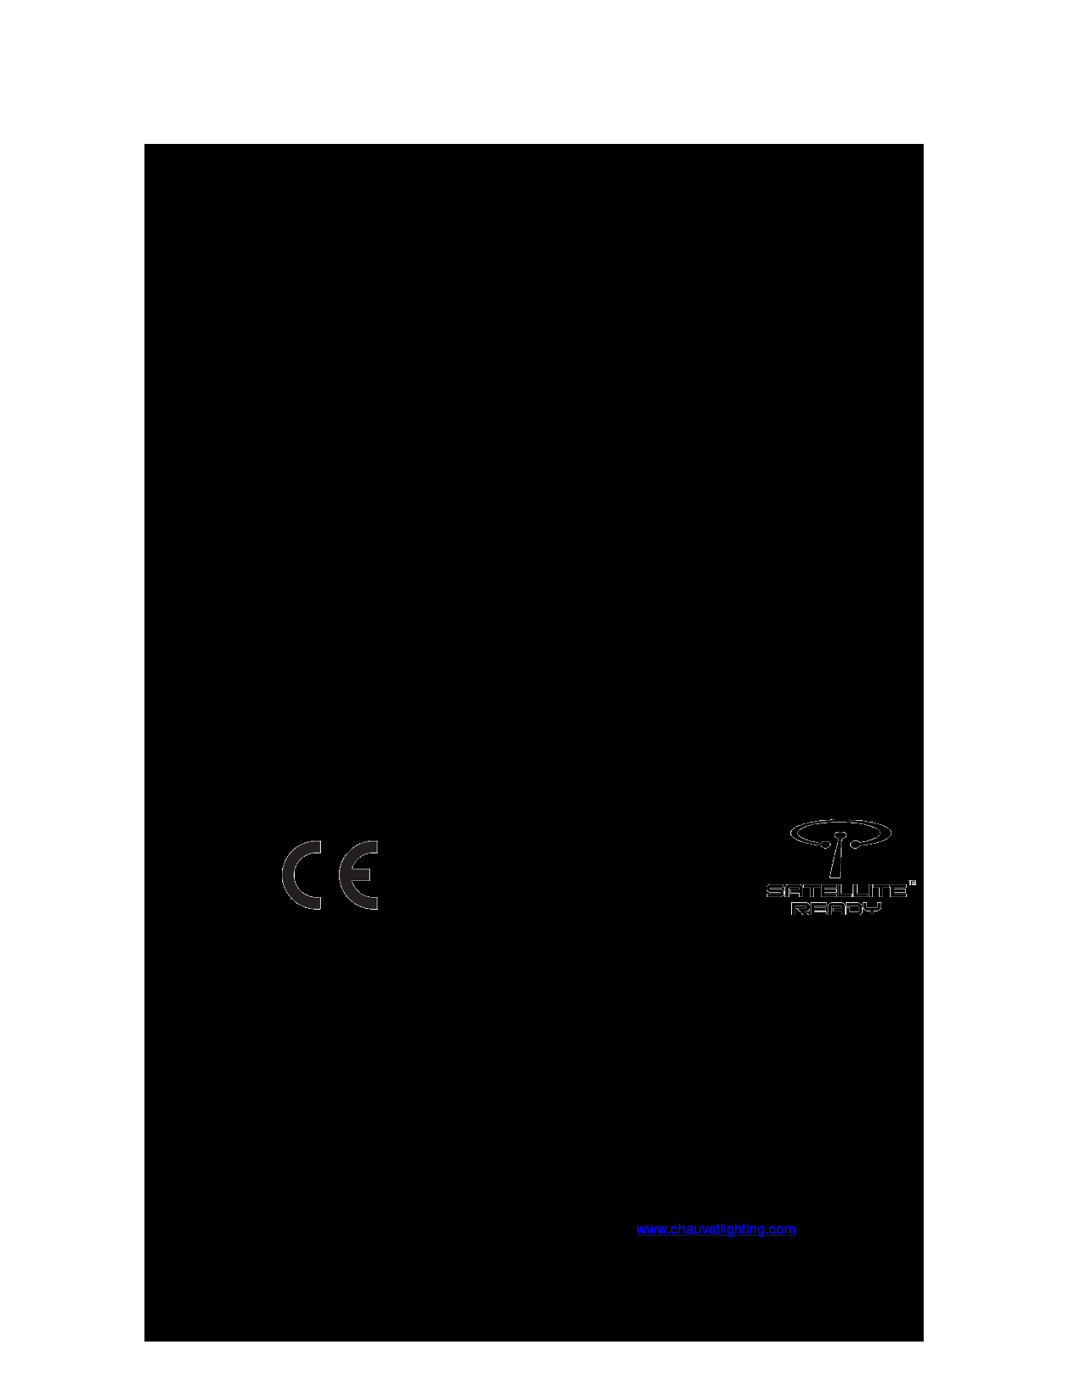 Chauvet 38 user manual Technical Specifications, Contact Us, World Wide 